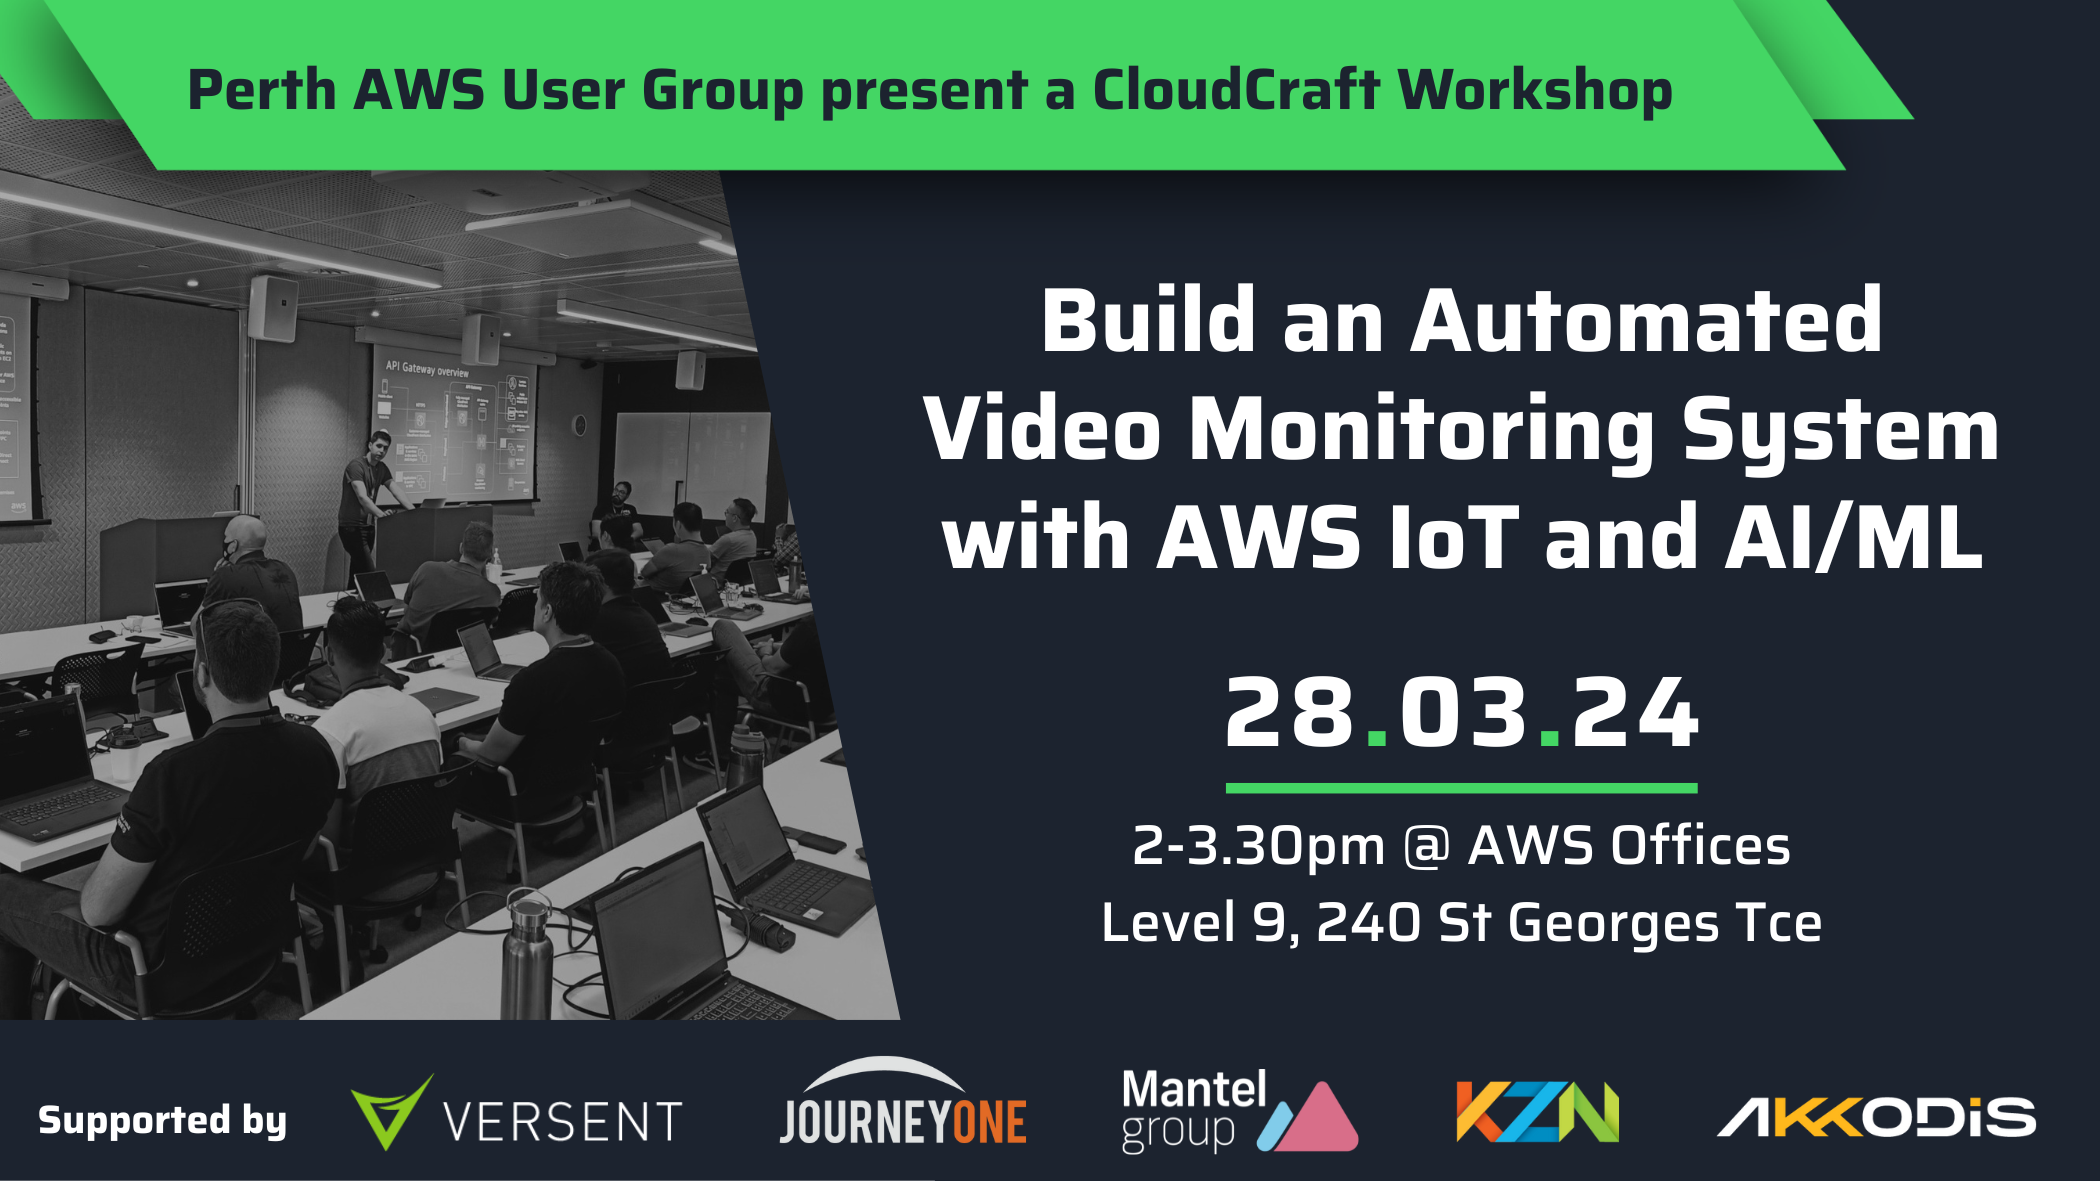 Cover Image for Build an automated video monitoring system with AWS IoT and AI/ML [CloudCraft Workshop]